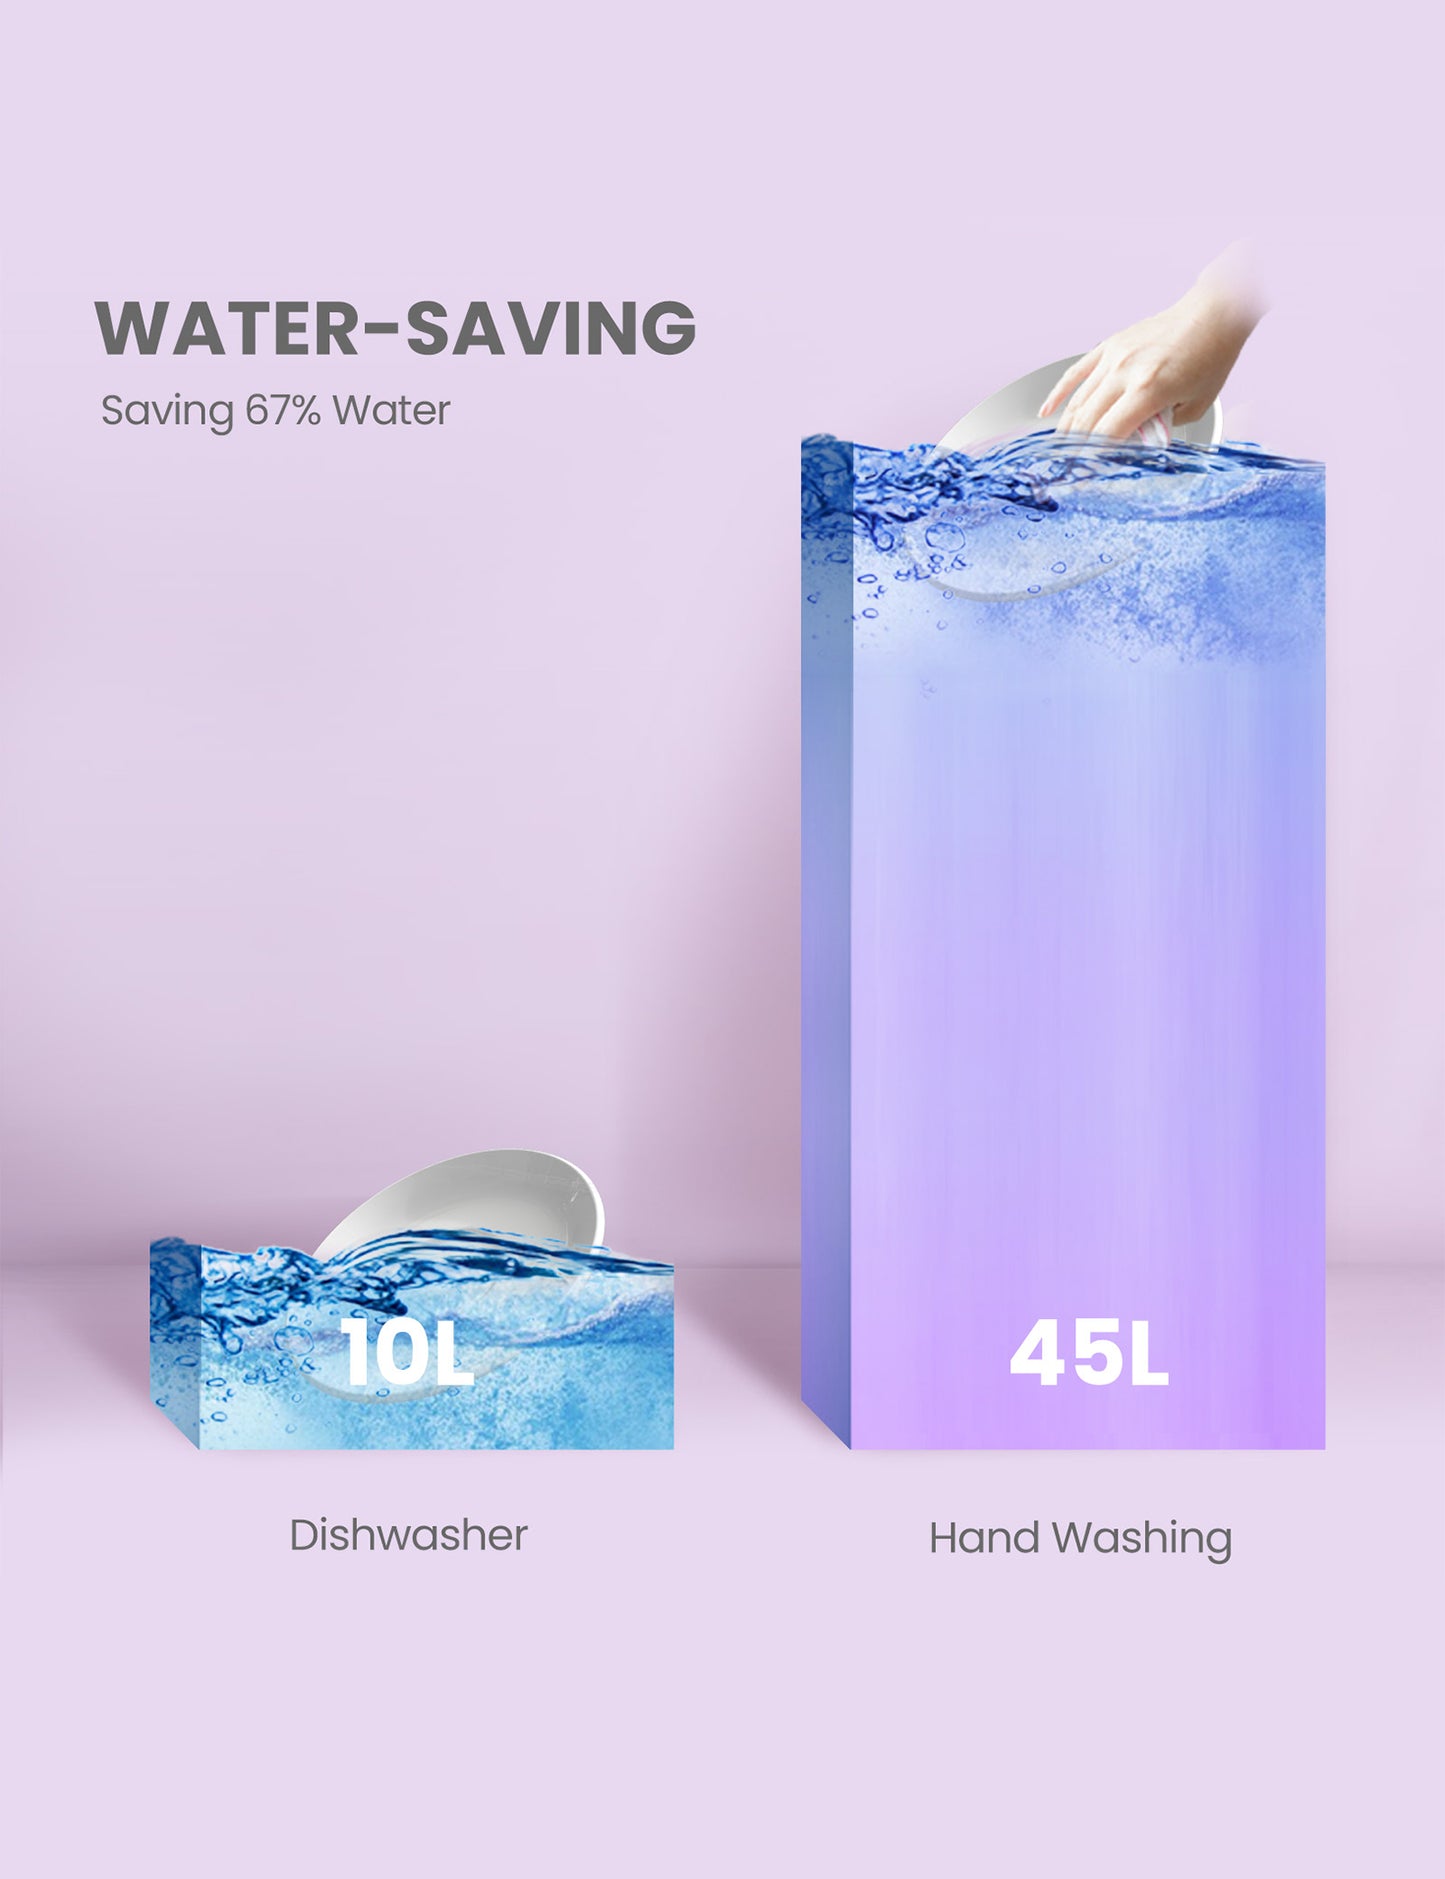 the amount of water that is saved using the comfee countertop portable dishwasher